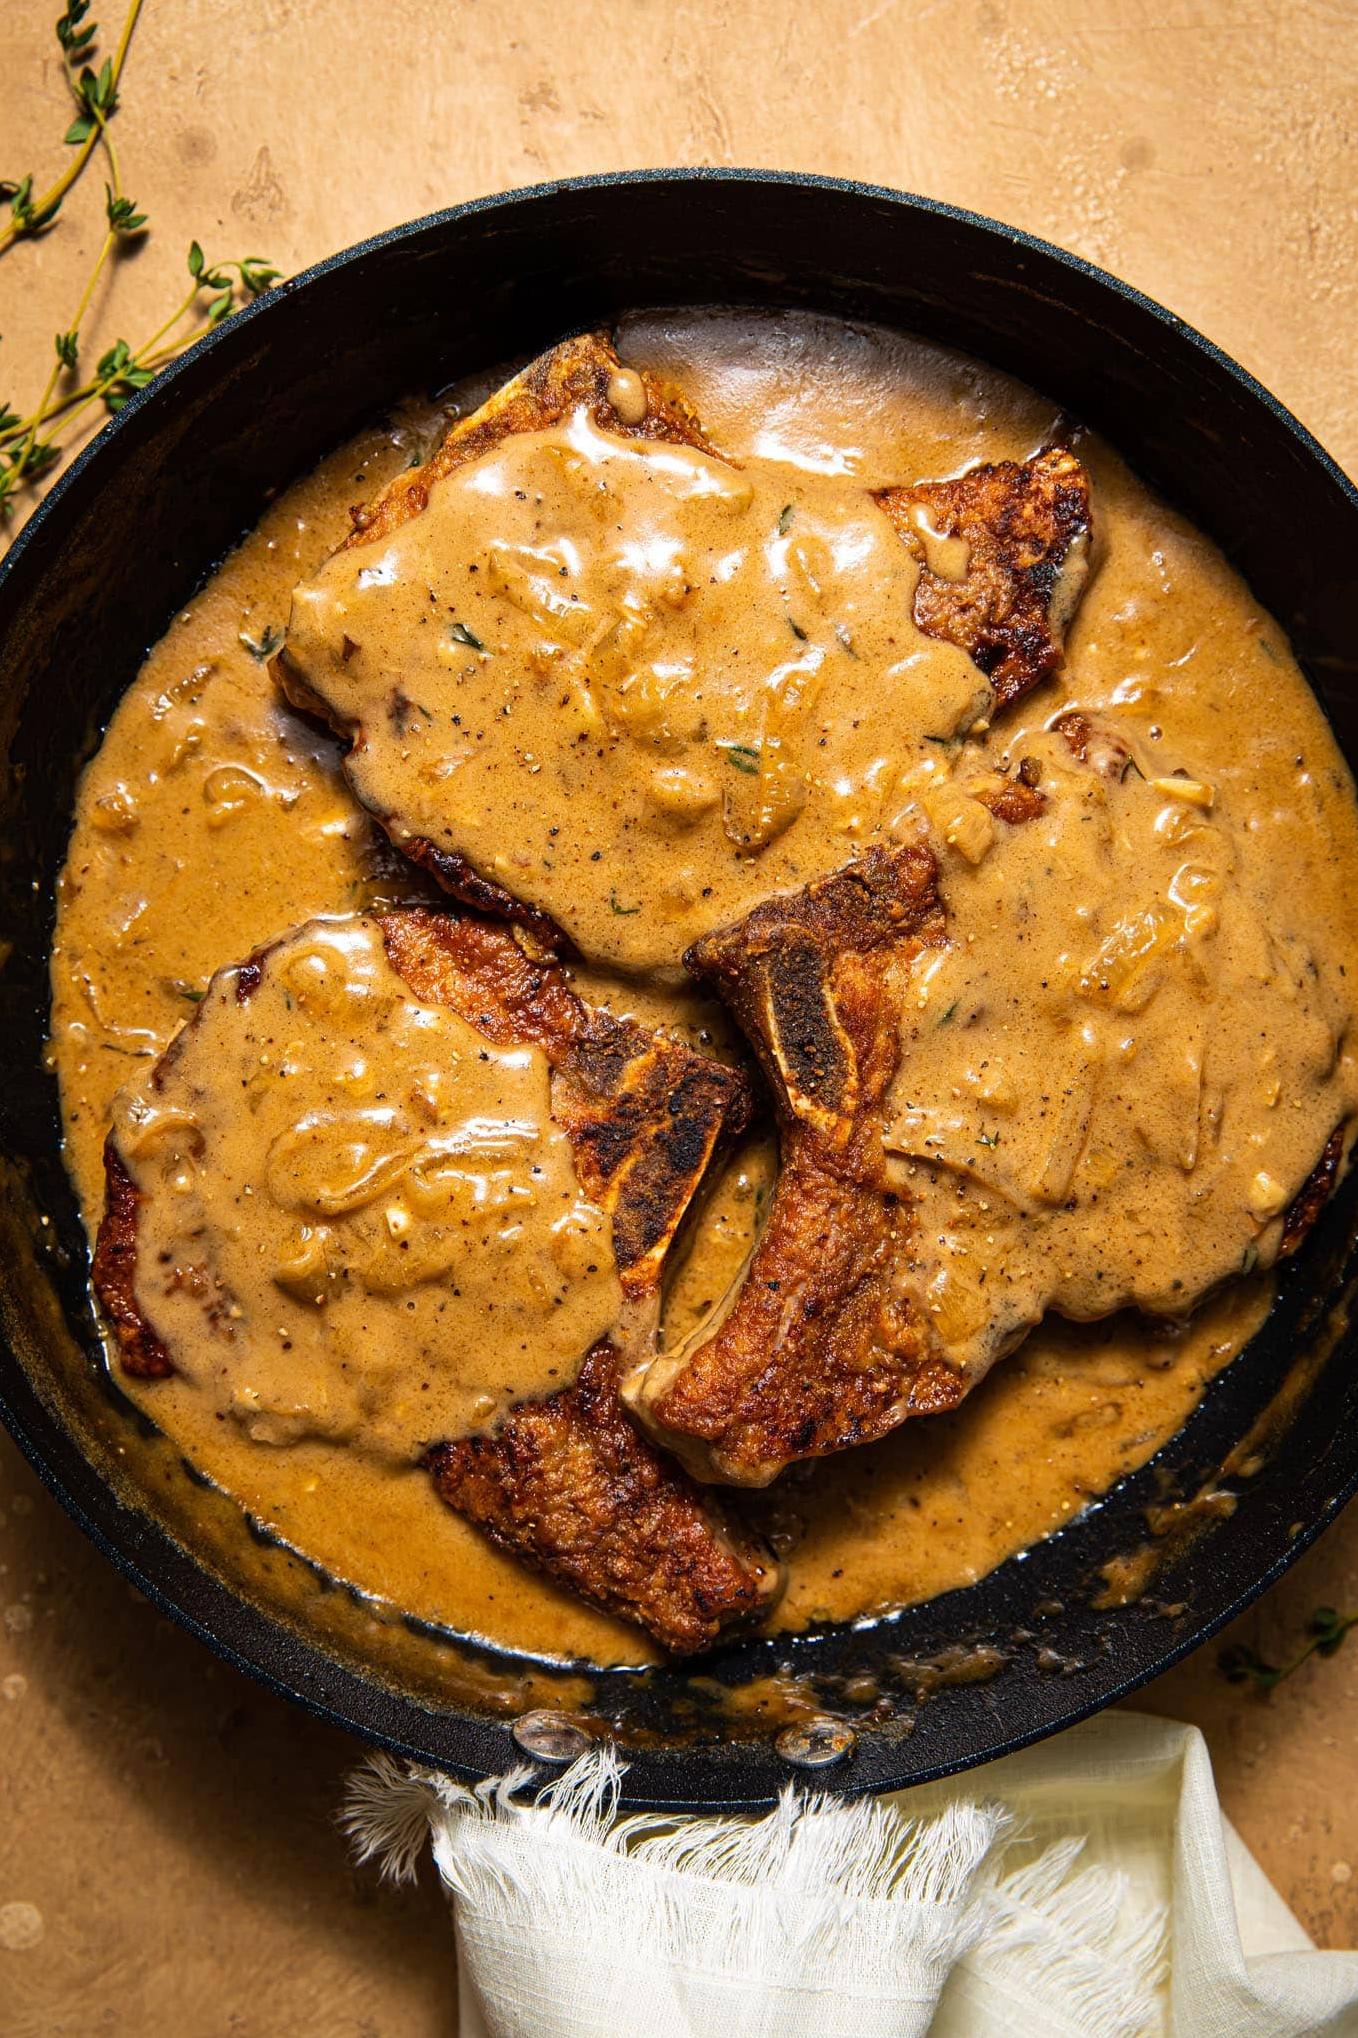  These juicy pork chops are smothered in a rich brown gravy that will make your taste buds dance.